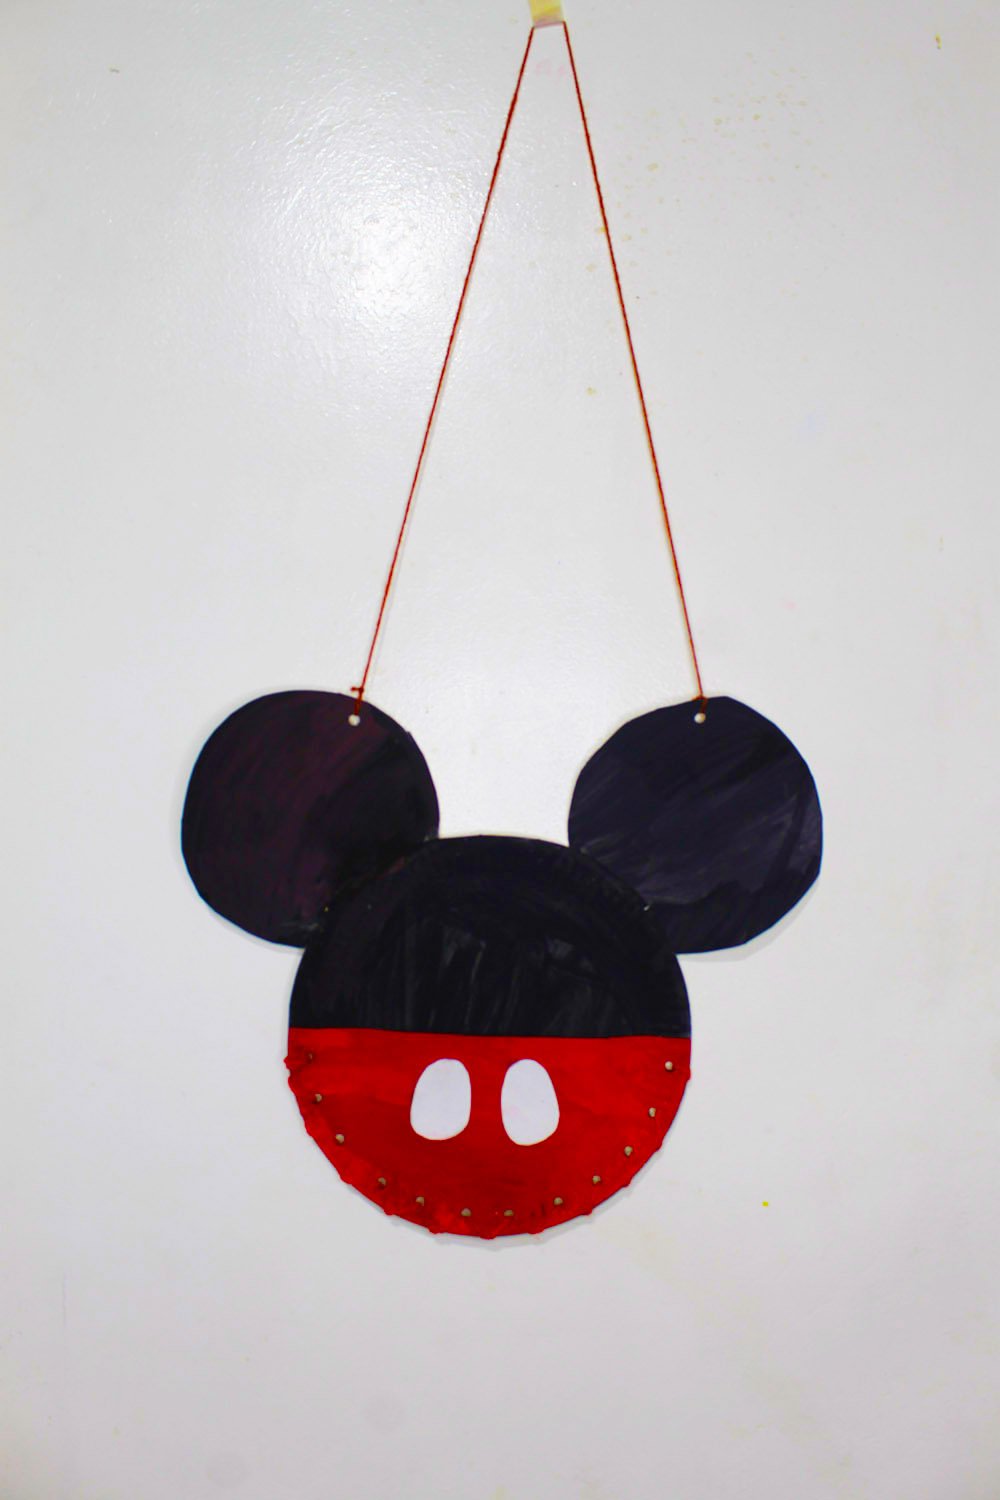 How to Make a Paper Plate Mouse - Step 32